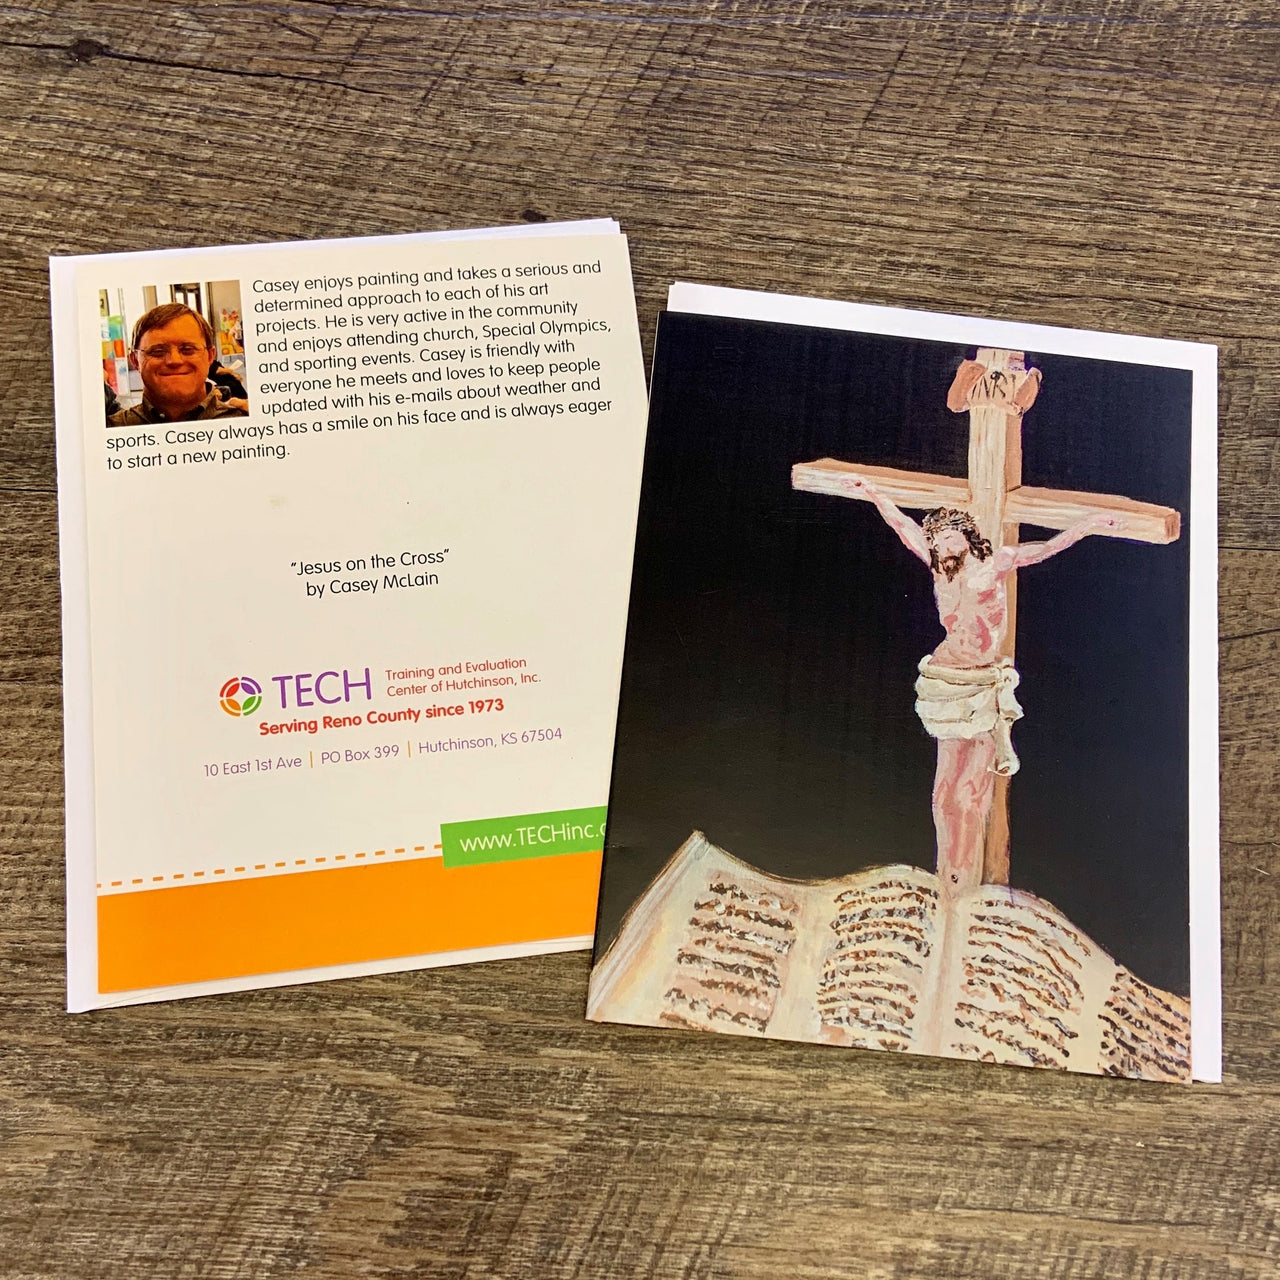 "Jesus on the Cross" Cards by Casey McLain